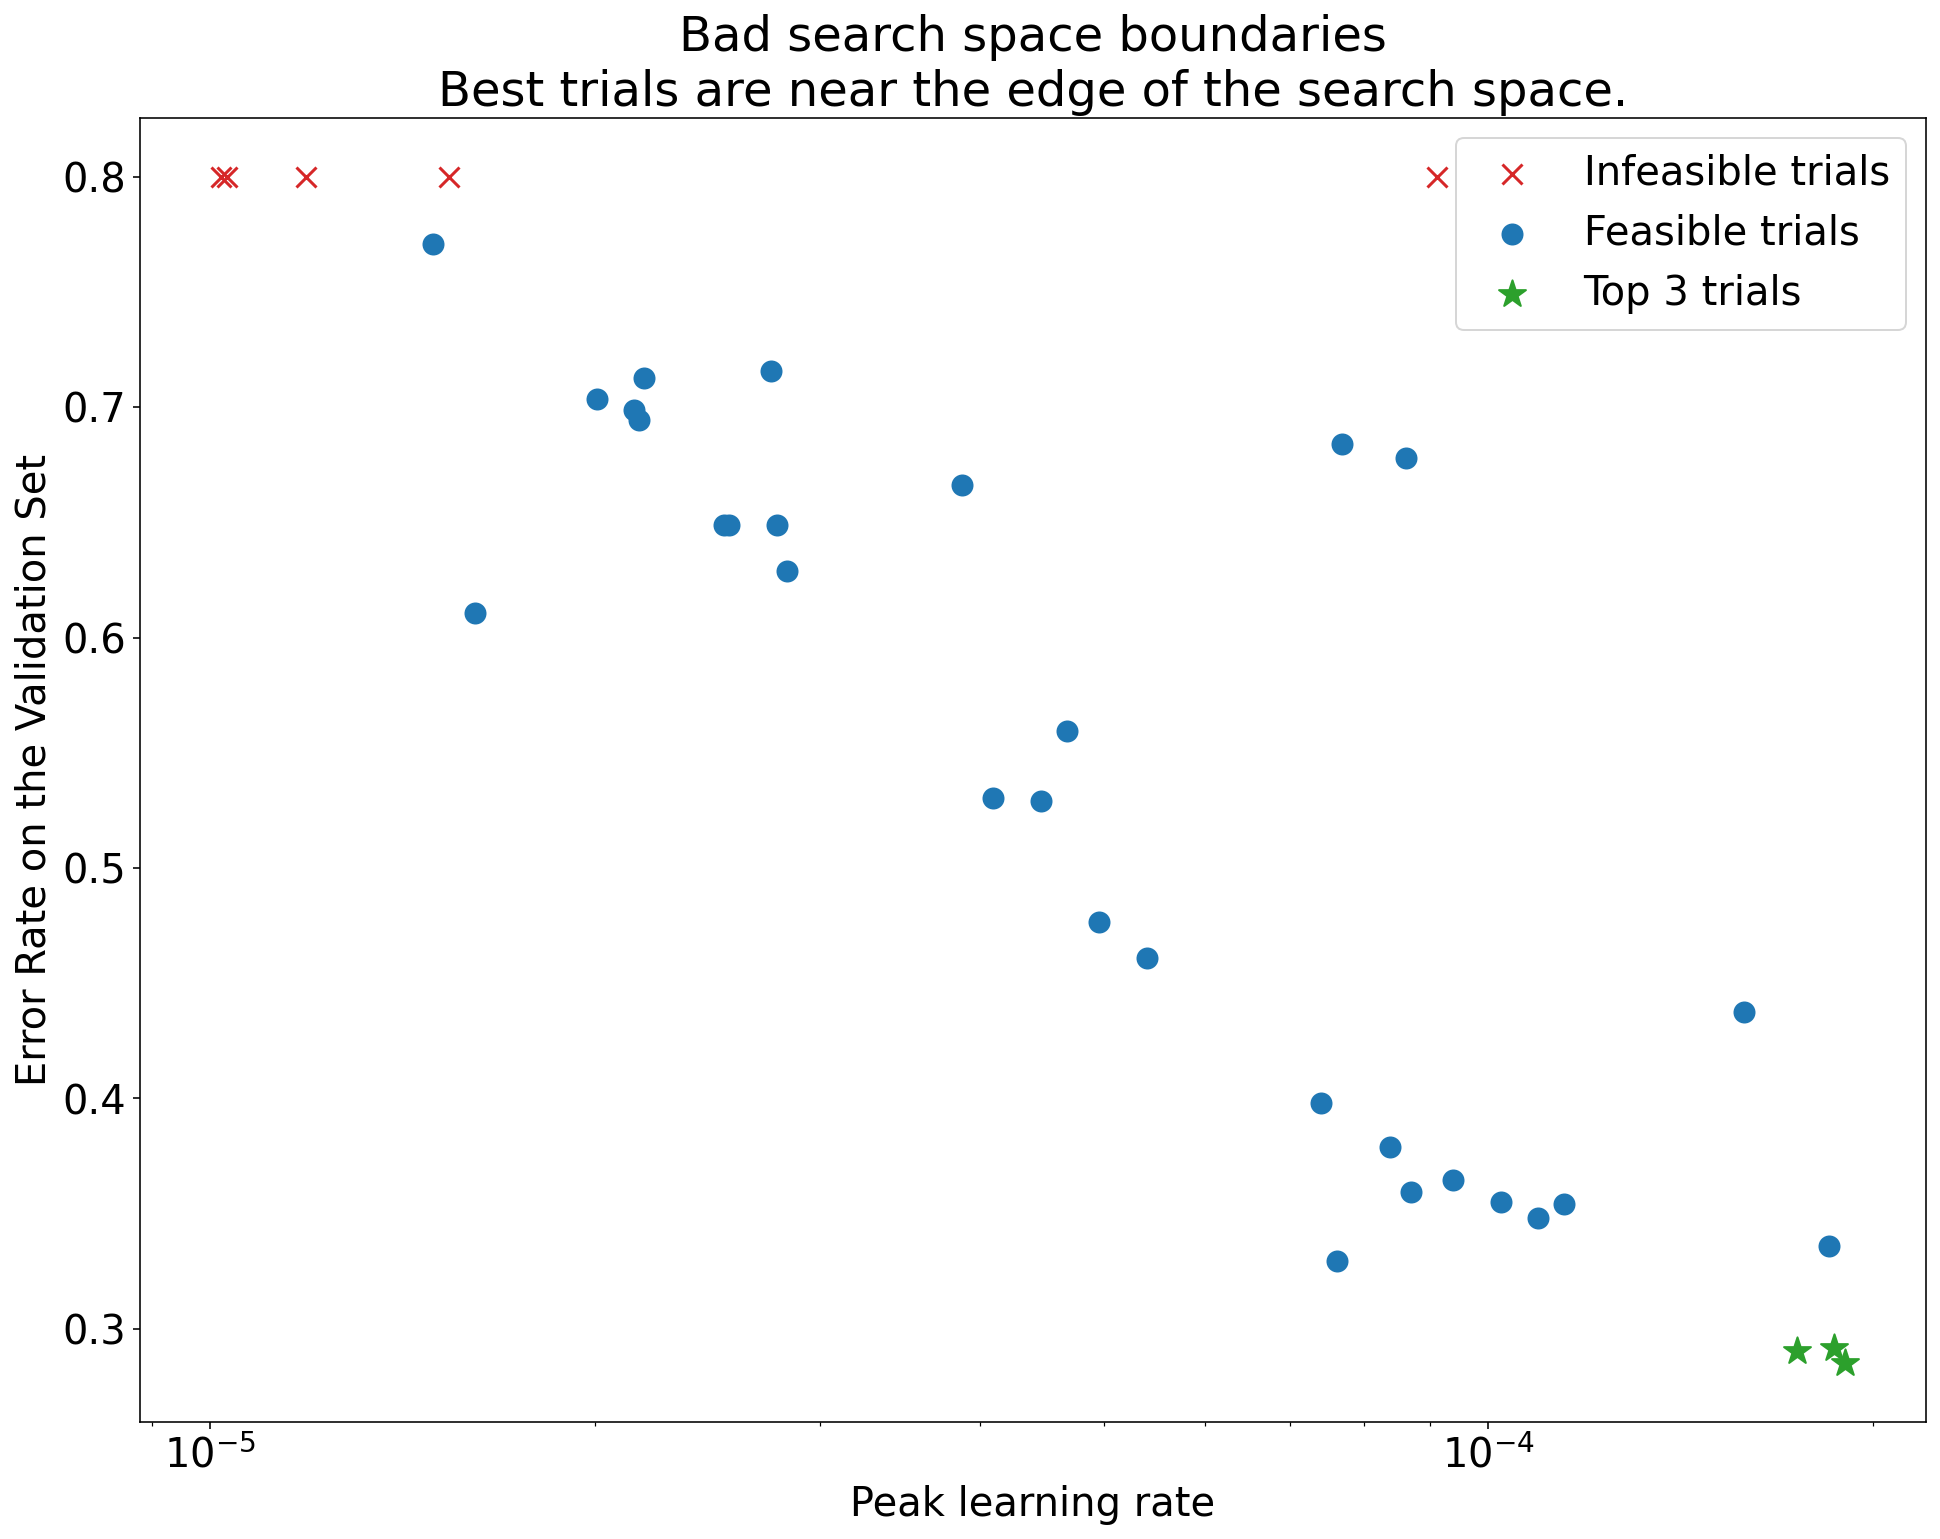 Graph of Error rate on the validation set (y-axis) vs.
          Peak learning rate (x-axis) demonstrating bad search
          space boundaries. In this graph, the best trials (lowest
          error rates) are near the edge of the search space, where
          the peak learning rate is highest.